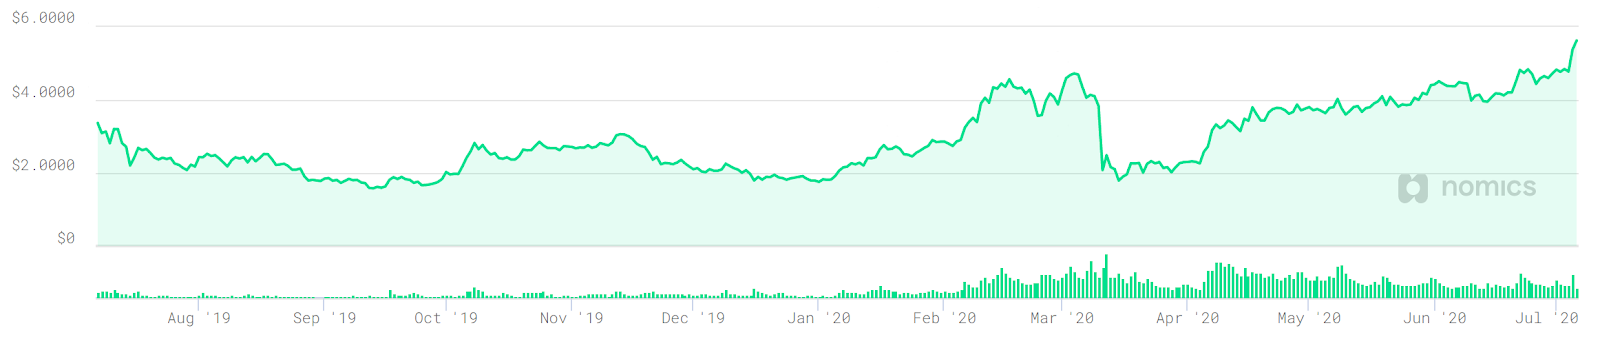 LINK price over the past 12 months